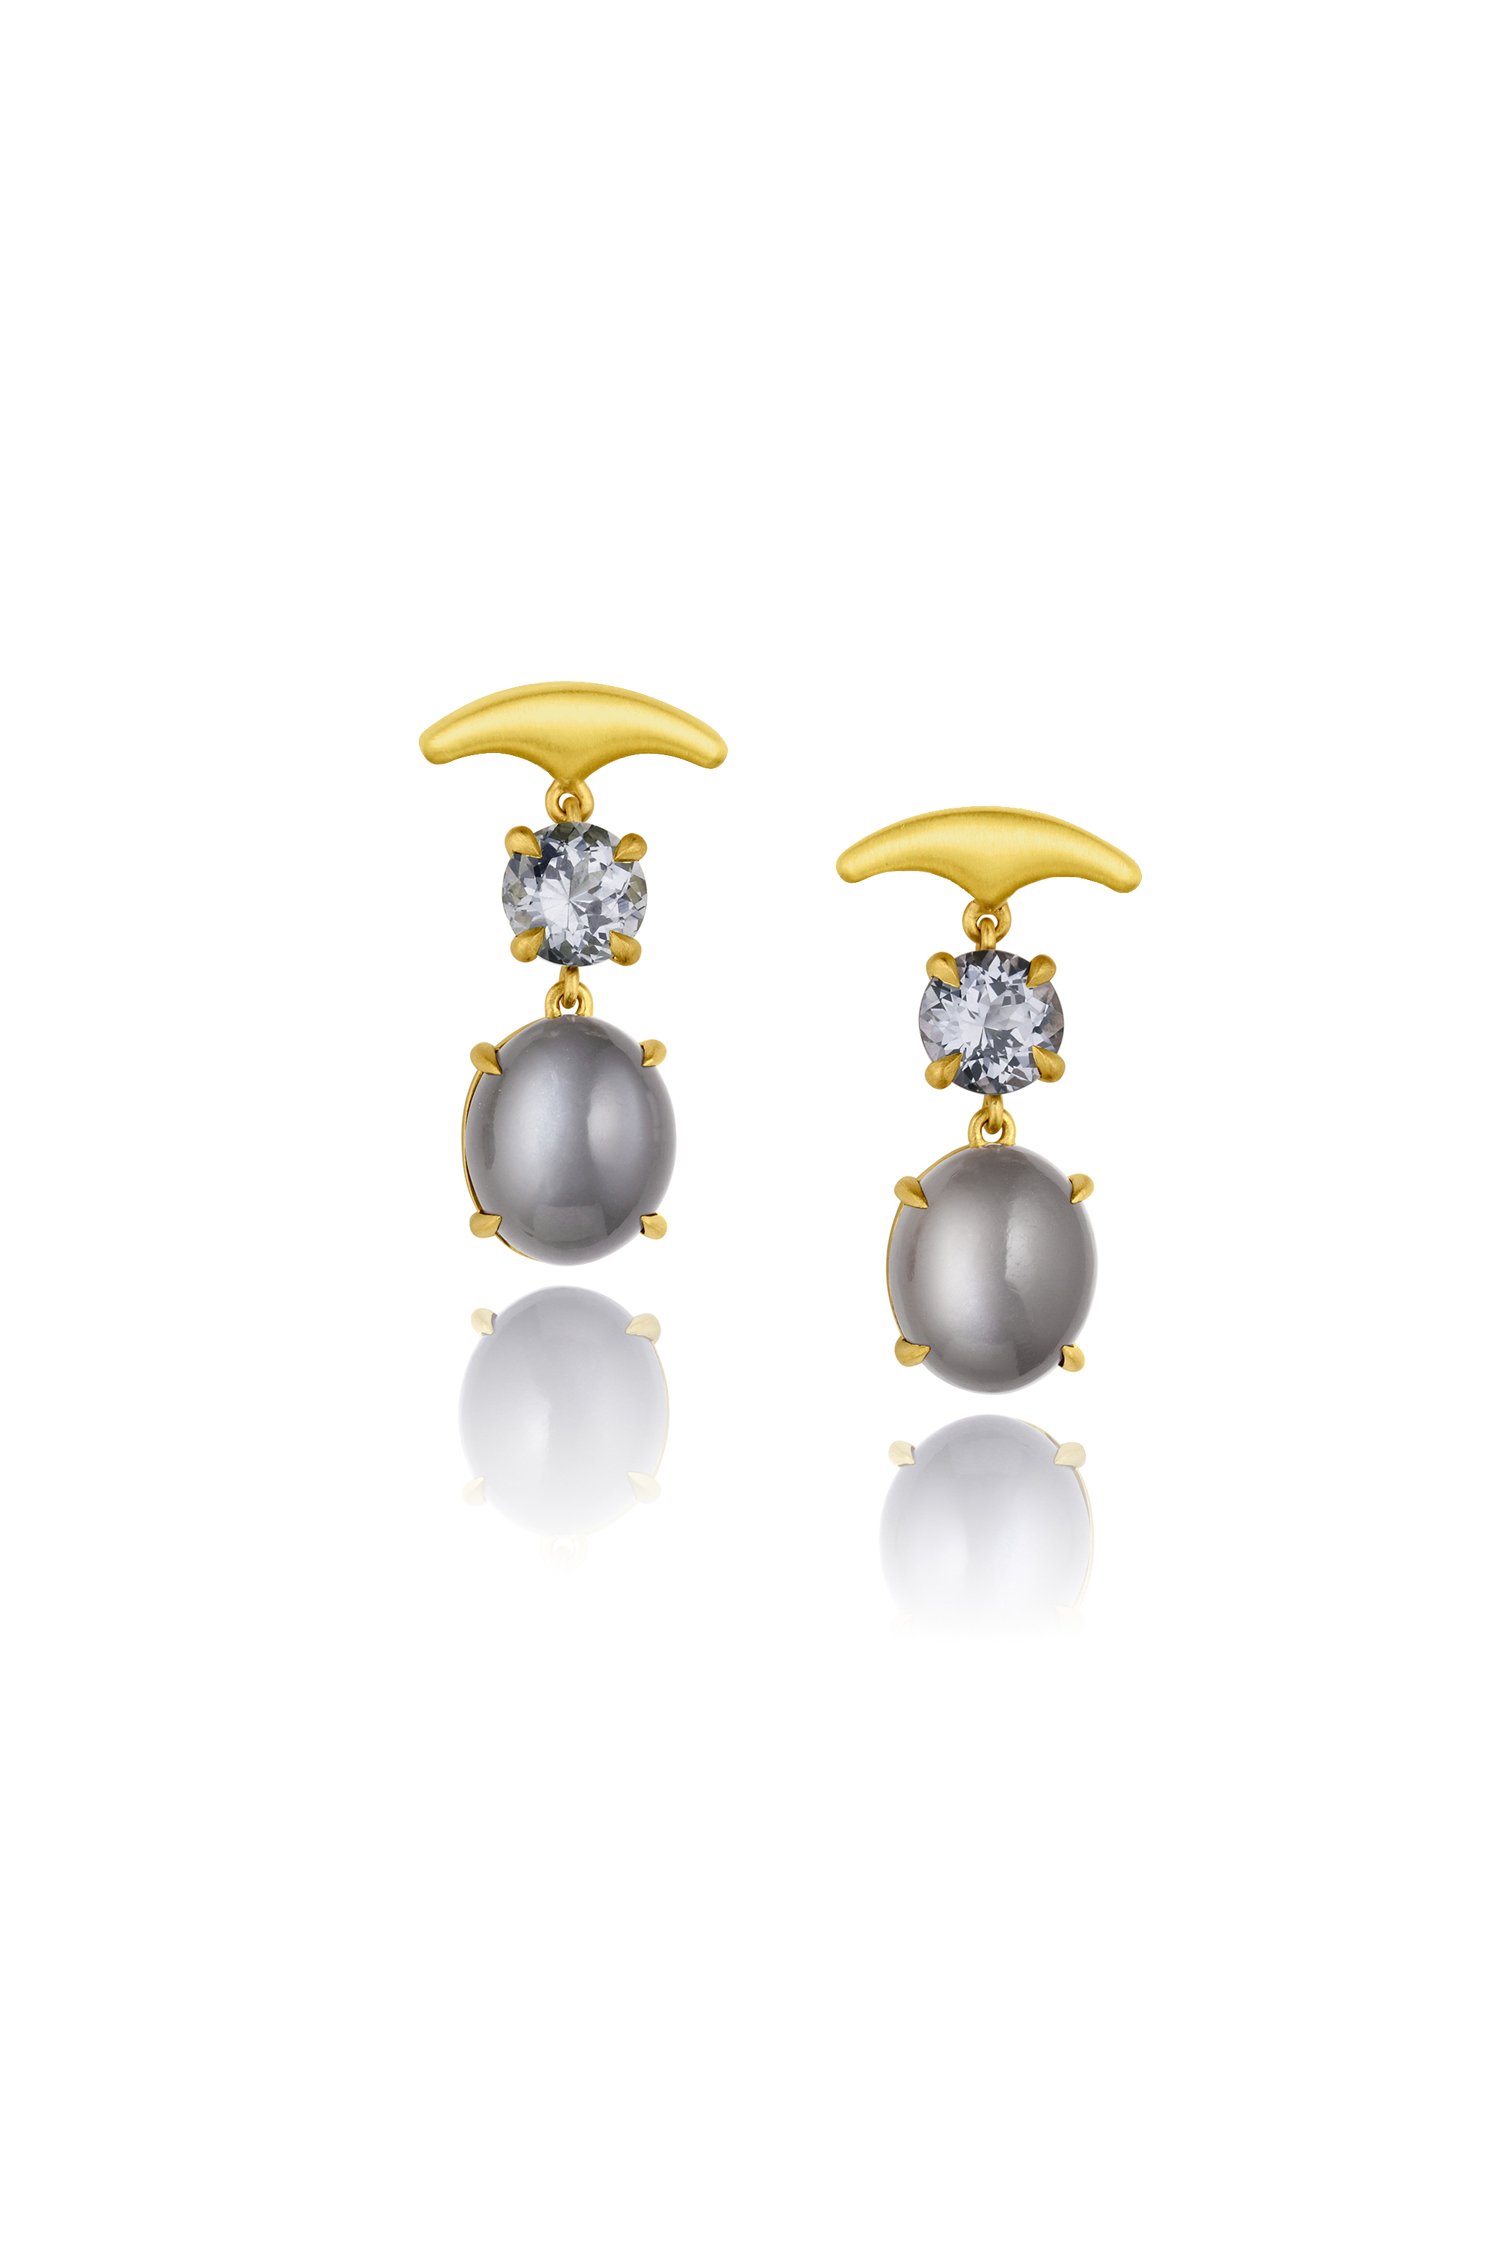 Leigh Maxwell Small Gemmy Wave Earrings - Grey Spinel/Grey Moonstone